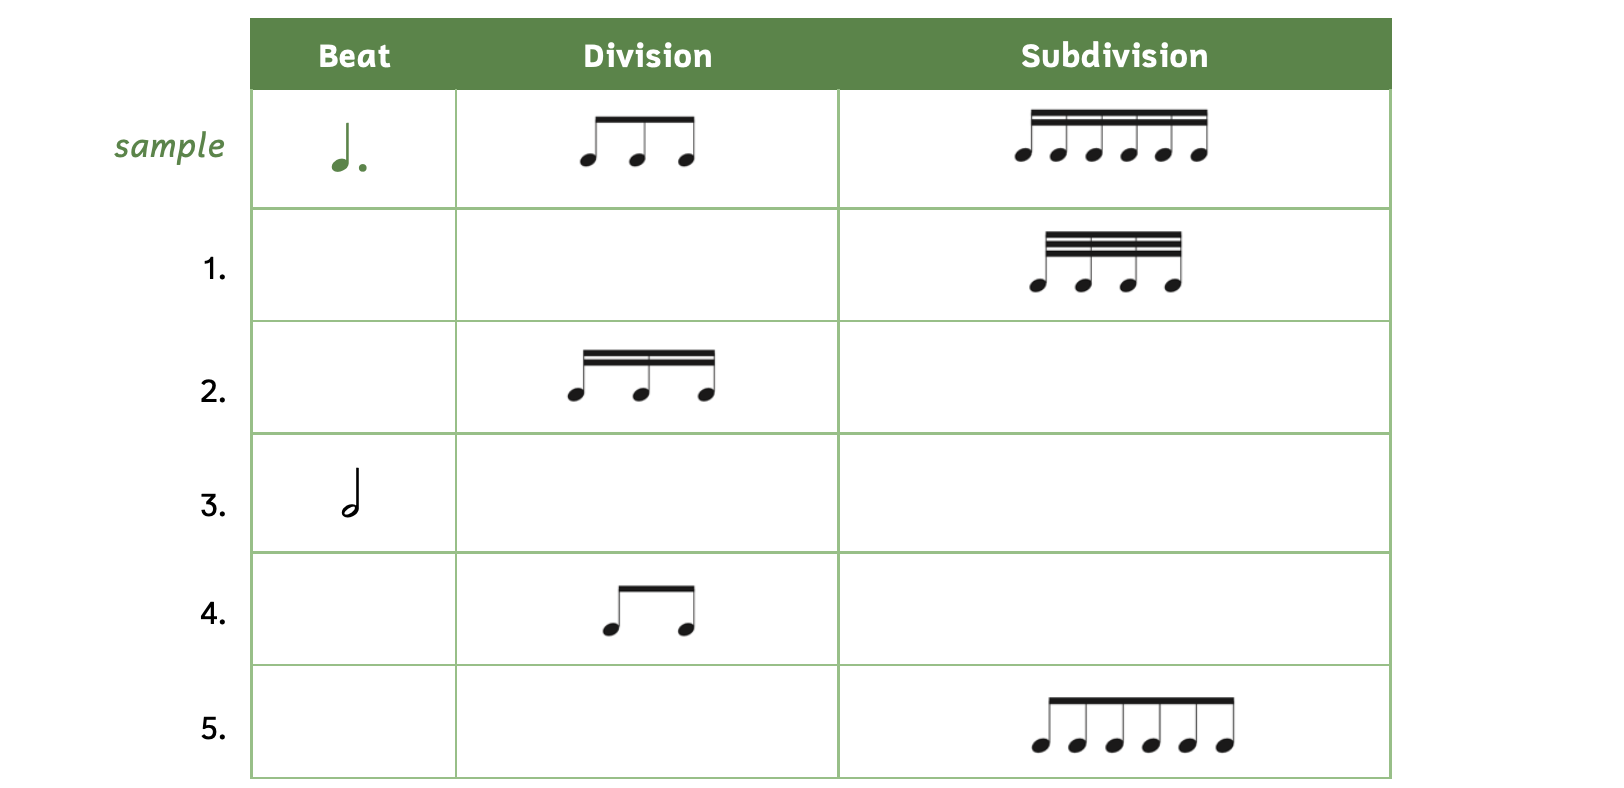 Exercises with a table asking for beats, divisions, or subdivisions. The first column asks for the beat, the second column asks for the division, and the third column asks for the subdivision. The sample shows a division of three eighth notes and six sixteenth notes. The answer is that the beat is a dotted quarter note. Number 1 shows the subdivision of four thirty-second notes. Number 2 shows the division of three sixteenth notes. Number 3 shows the beat of a half note. Number 4 shows the division of two eighth notes. Number 5 shows the subdivision of 6 eighth notes.